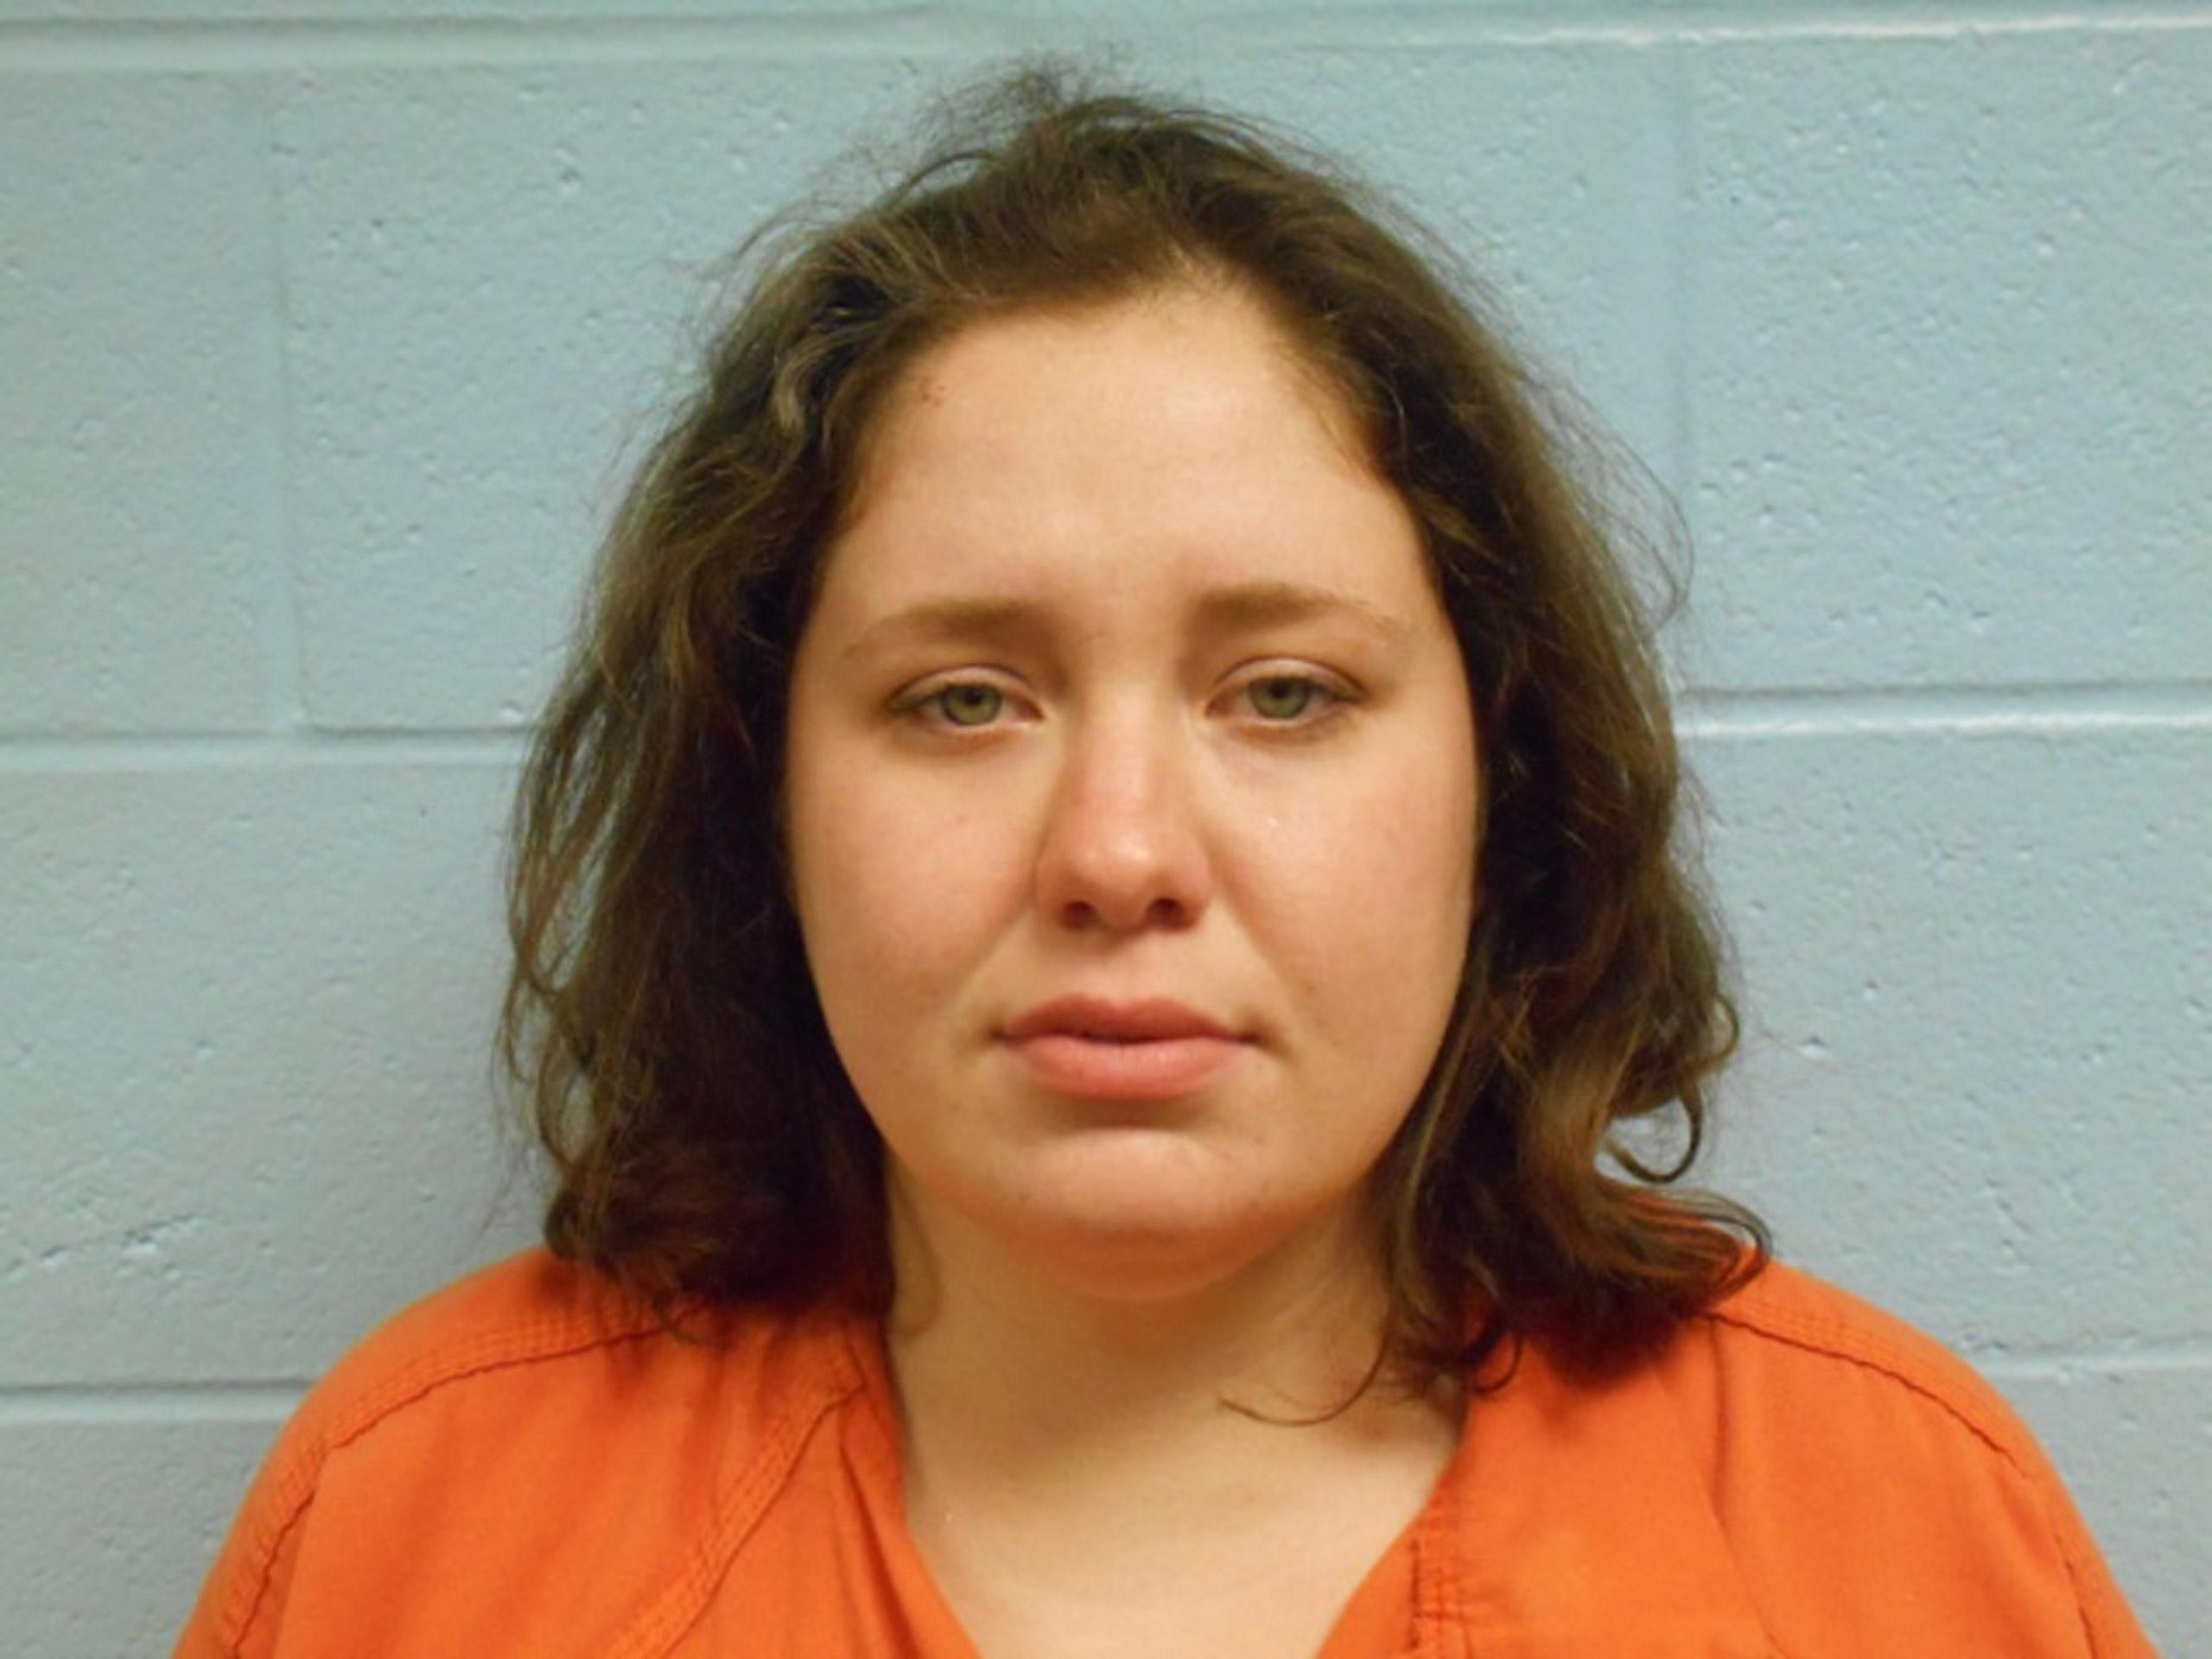 Mugshot of the drunk driver who plowed her car into the crowd at the Oklahoma State University homecoming parade, killing four people including a toddler.